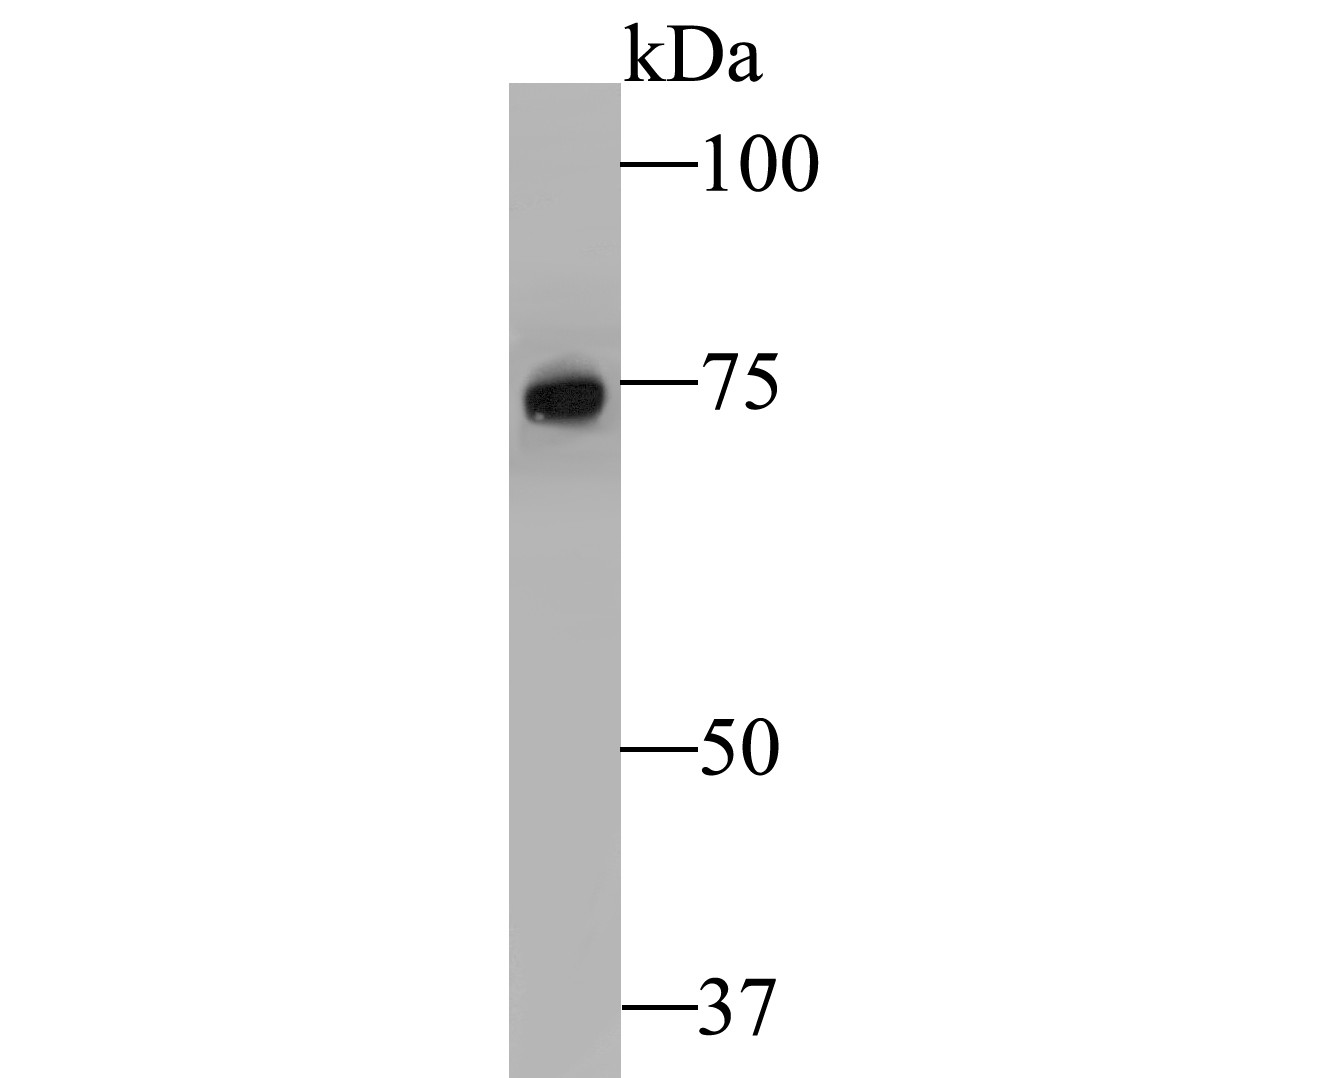 Western blot analysis of RSK1 p90 on Daudi cell lysate. Proteins were transferred to a PVDF membrane and blocked with 5% BSA in PBS for 1 hour at room temperature. The primary antibody (ET7109-83, 1/500) was used in 5% BSA at room temperature for 2 hours. Goat Anti-Rabbit IgG - HRP Secondary Antibody (HA1001) at 1:5,000 dilution was used for 1 hour at room temperature.